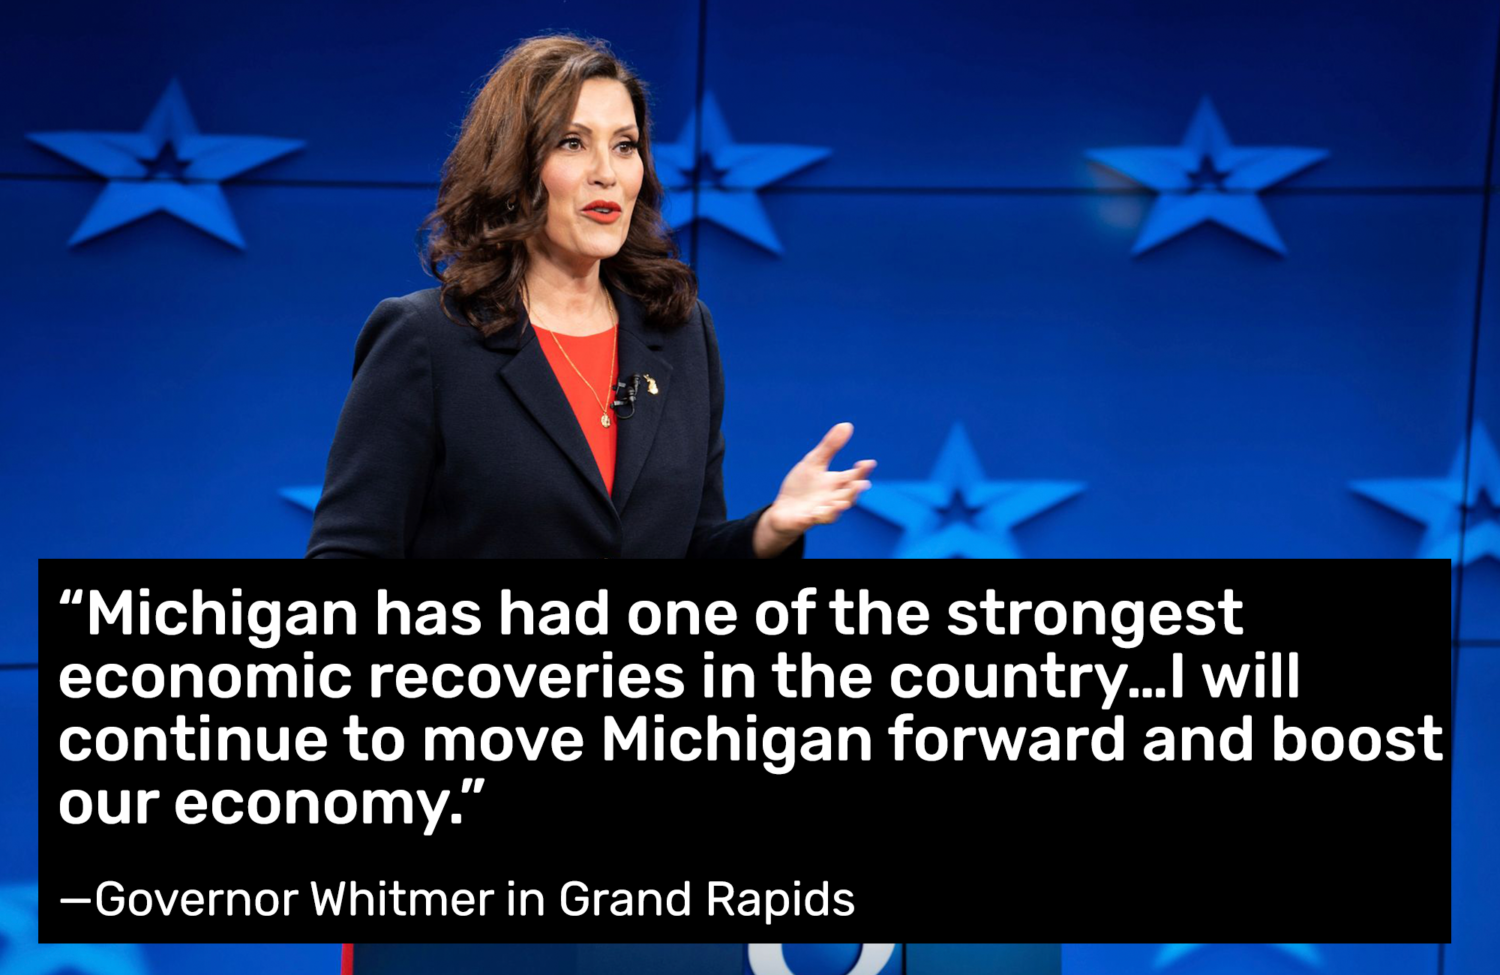 Michigan has had one of the strongest economic recoveries in the country... I will continue to move Michigan forward and boost our economy. Governor Whitmer in Grand Rapids